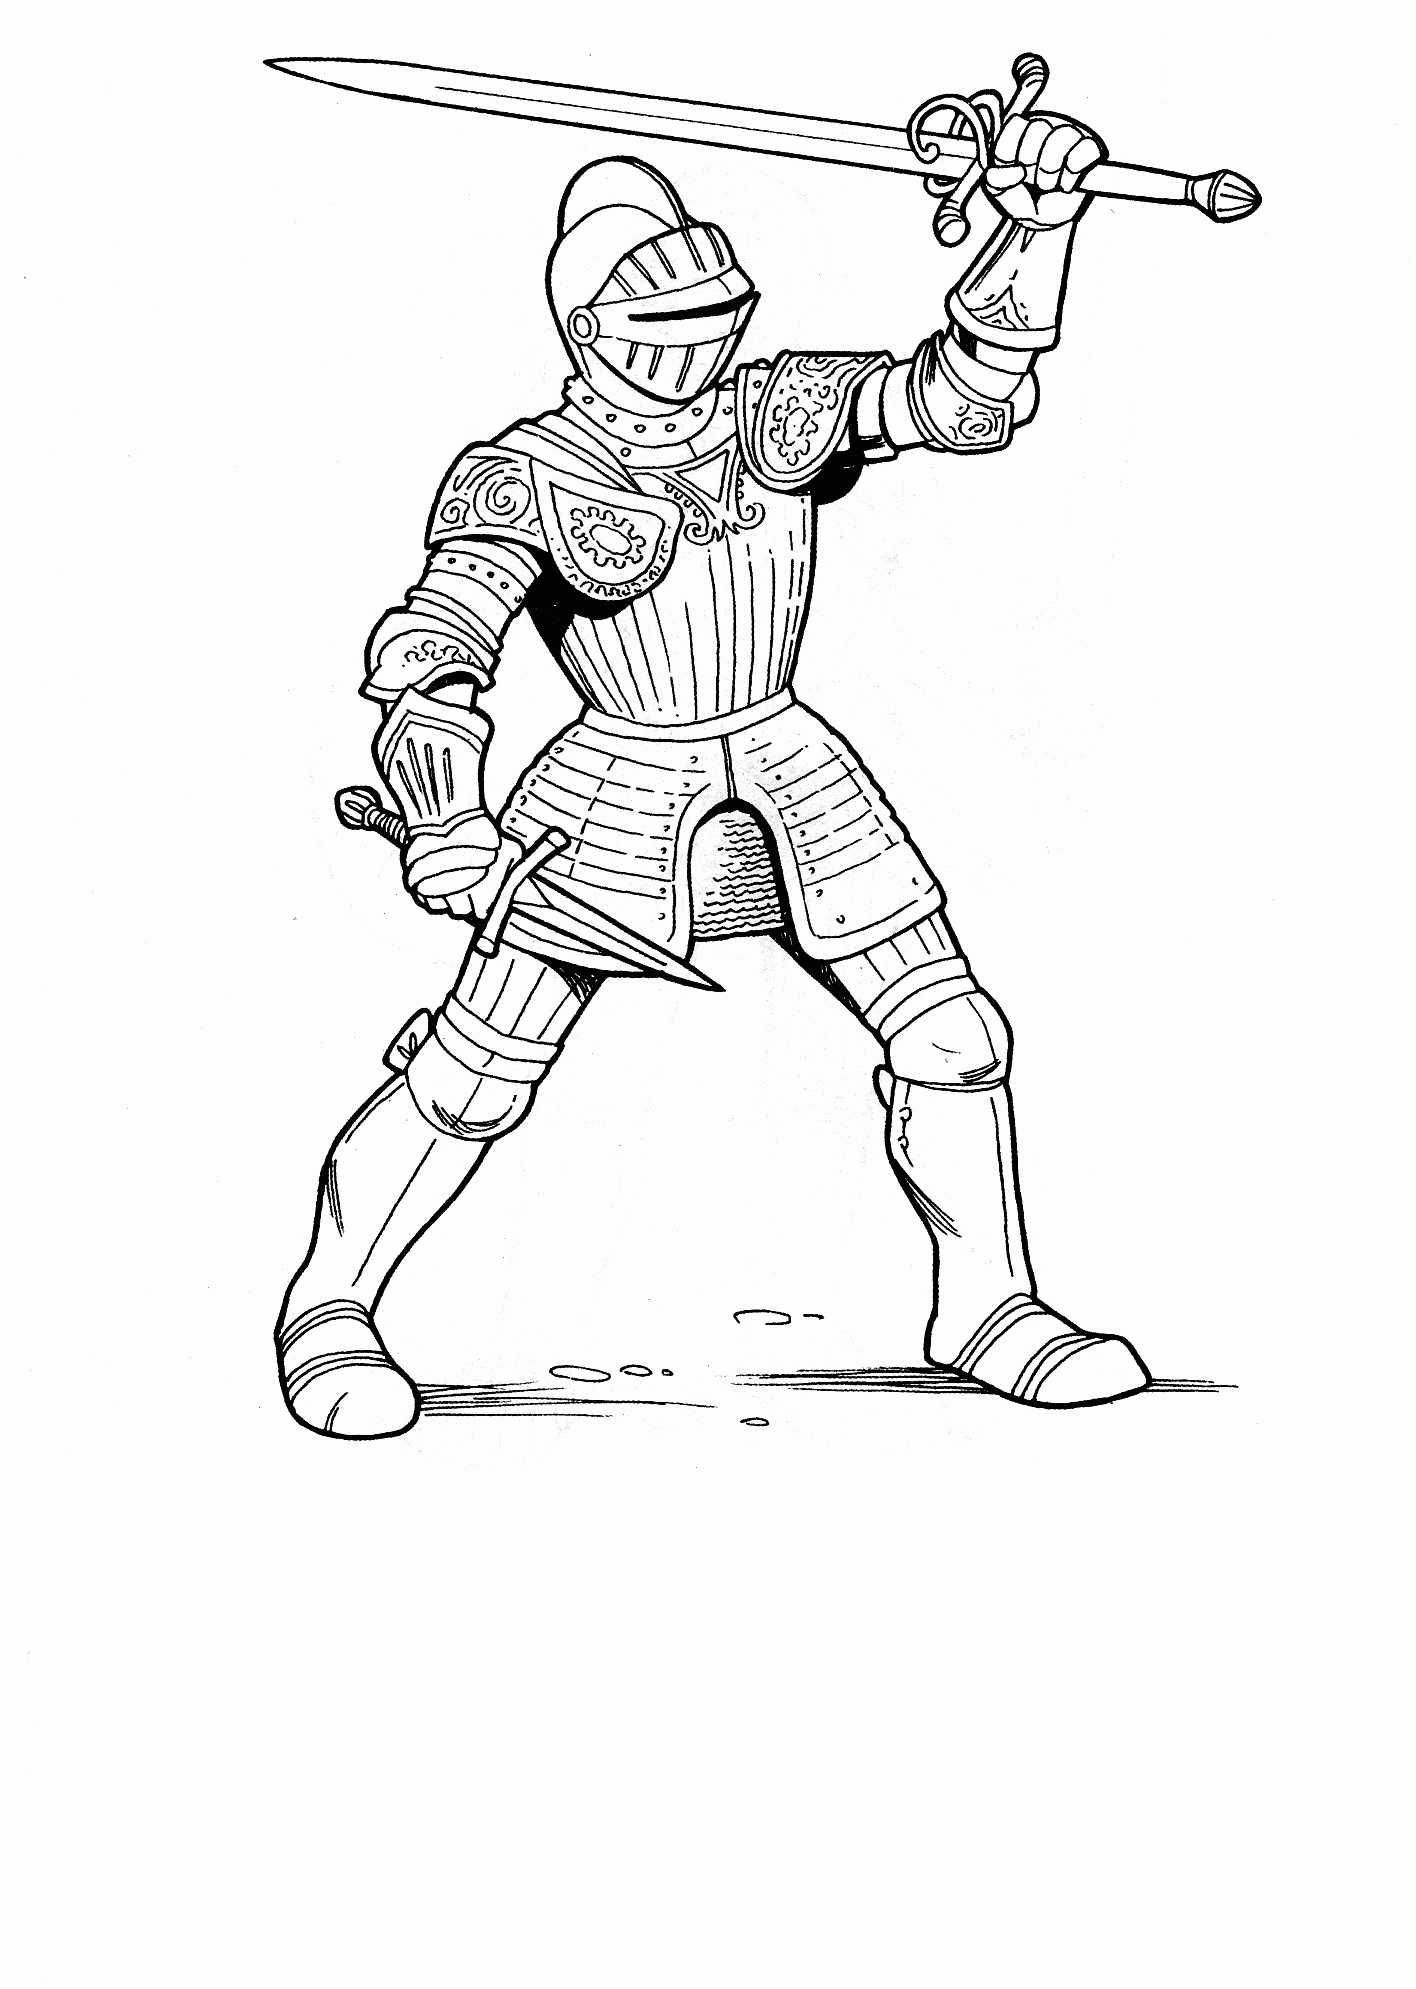 Knight Coloring Sheets #knight Coloring Sheets #coloringpages - Free Printable Pictures Of Knights